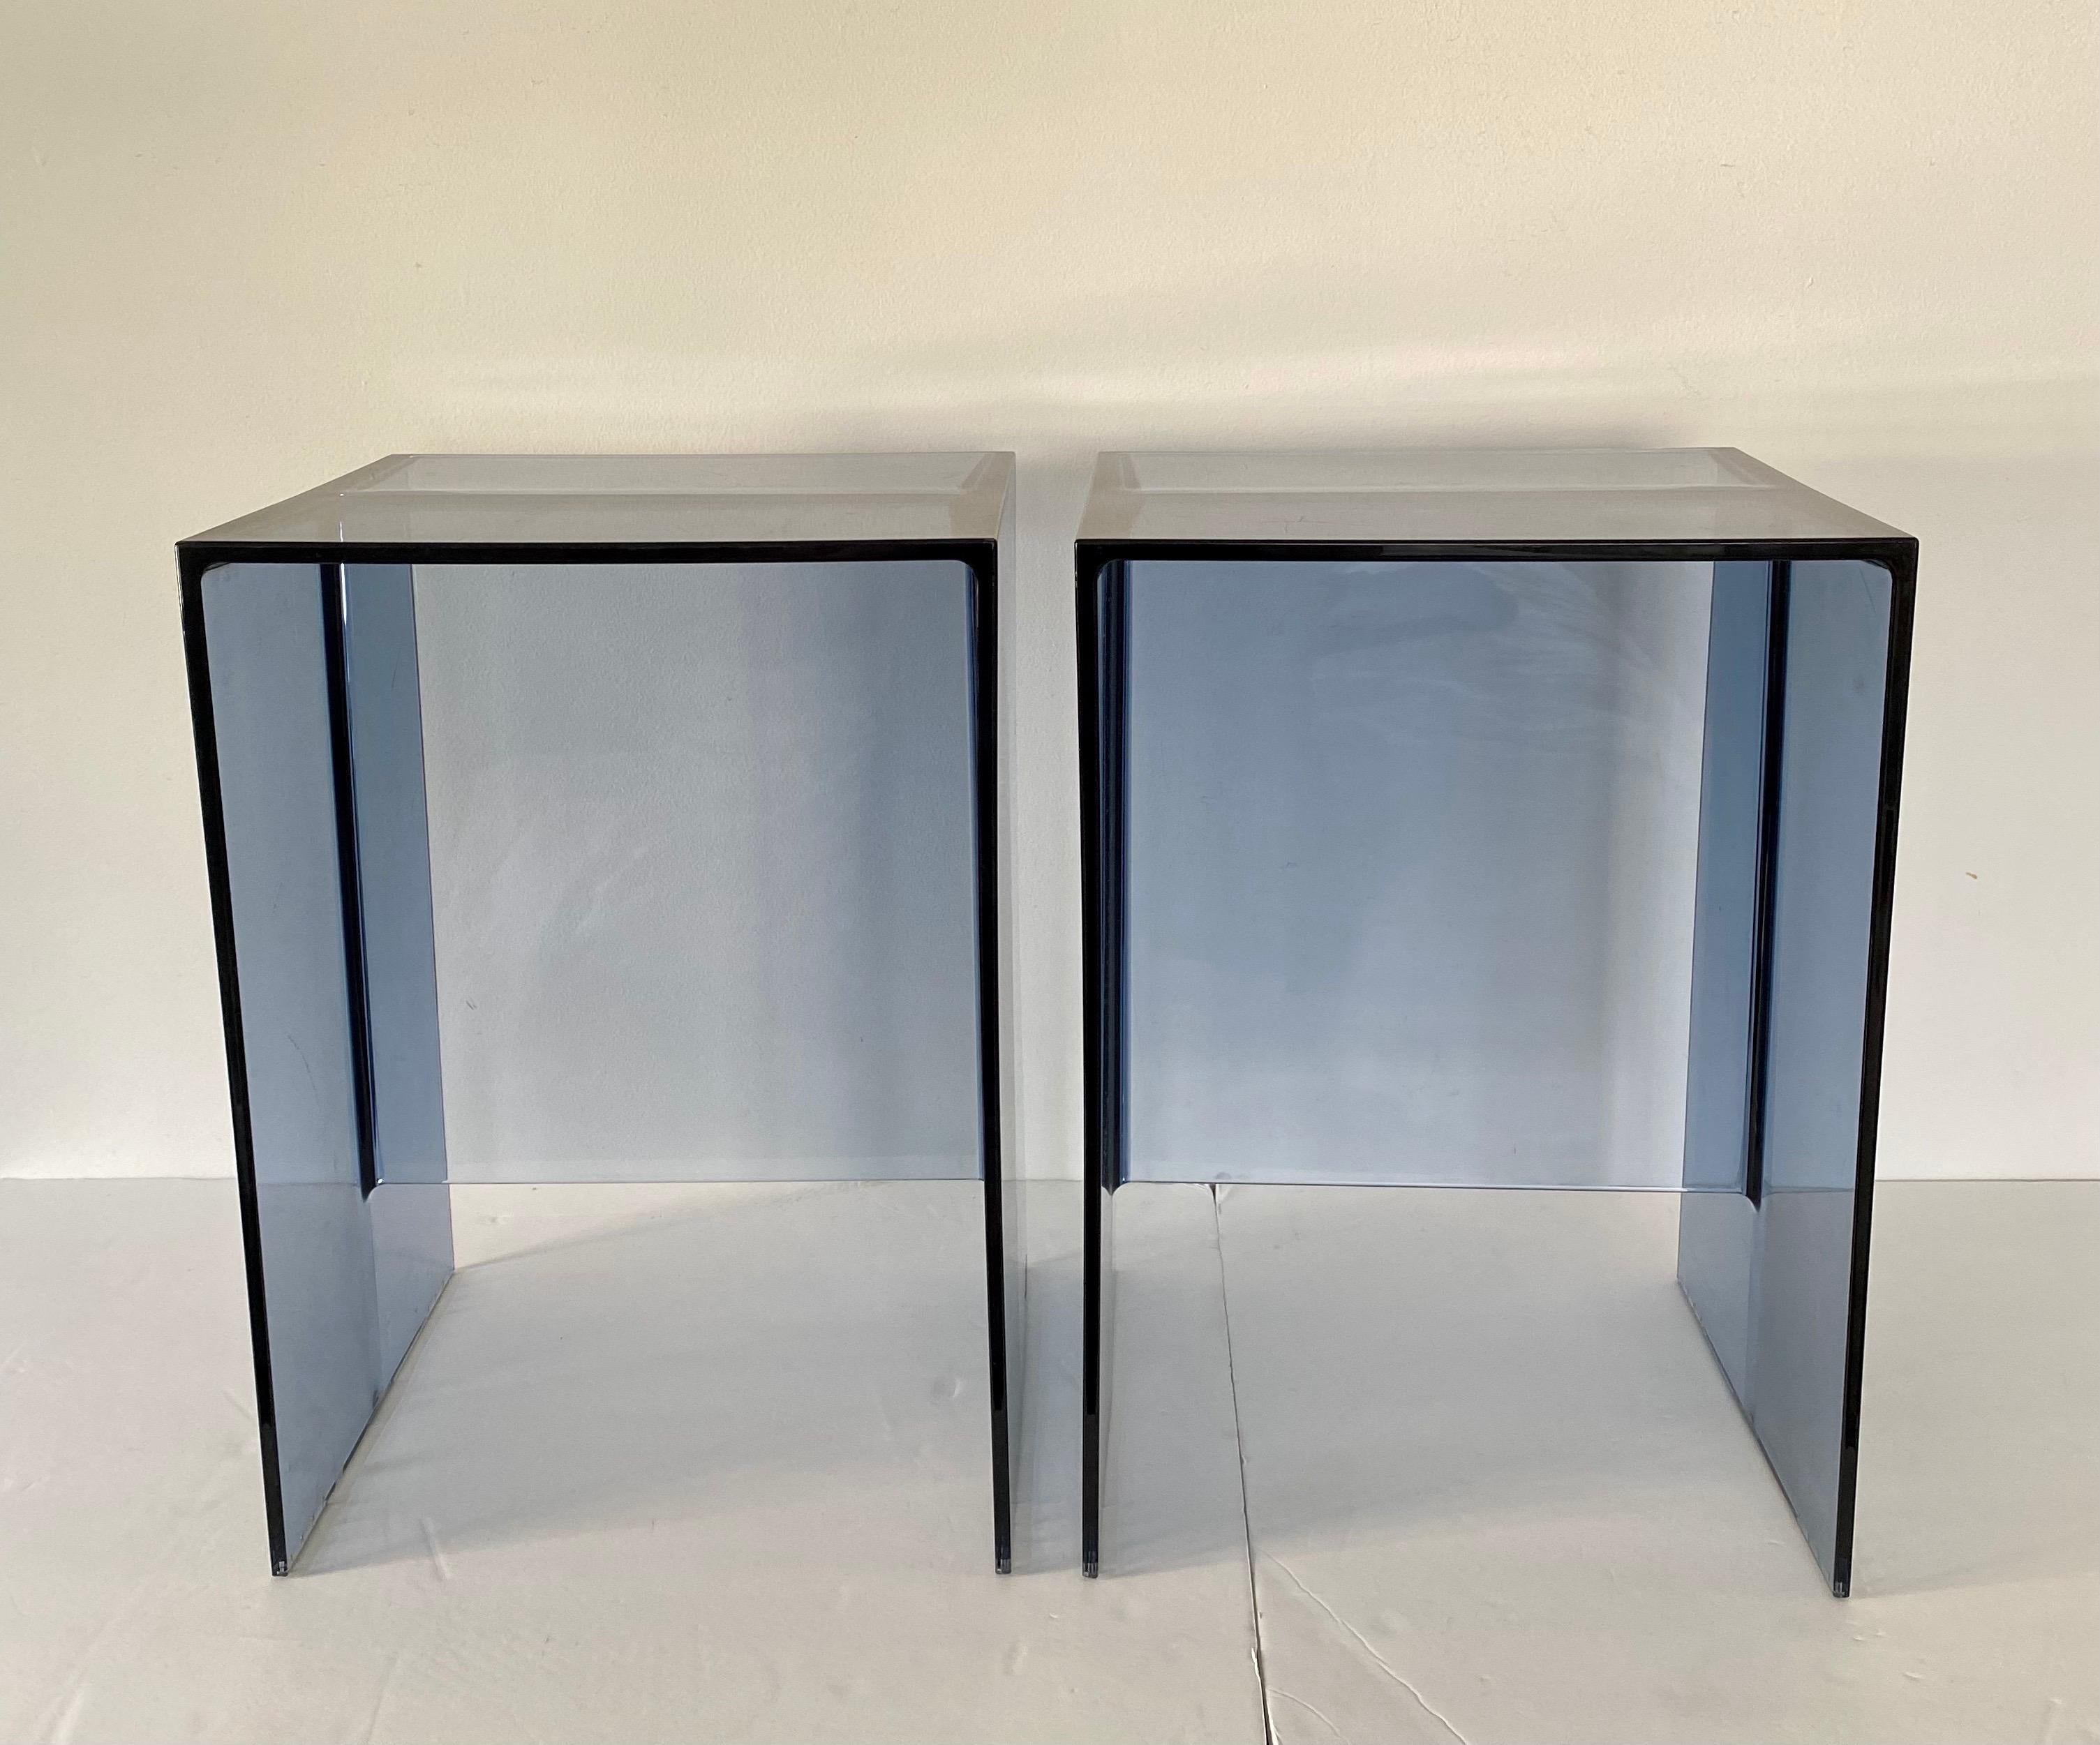 Pair of geometric Max-Beam side tables by Ludovica + Roberto Palomba for Kartell. These modern transparent blue-grey acrylic side accent tables are also strong enough to use as stools for additional seating. Try bunching them together to form a